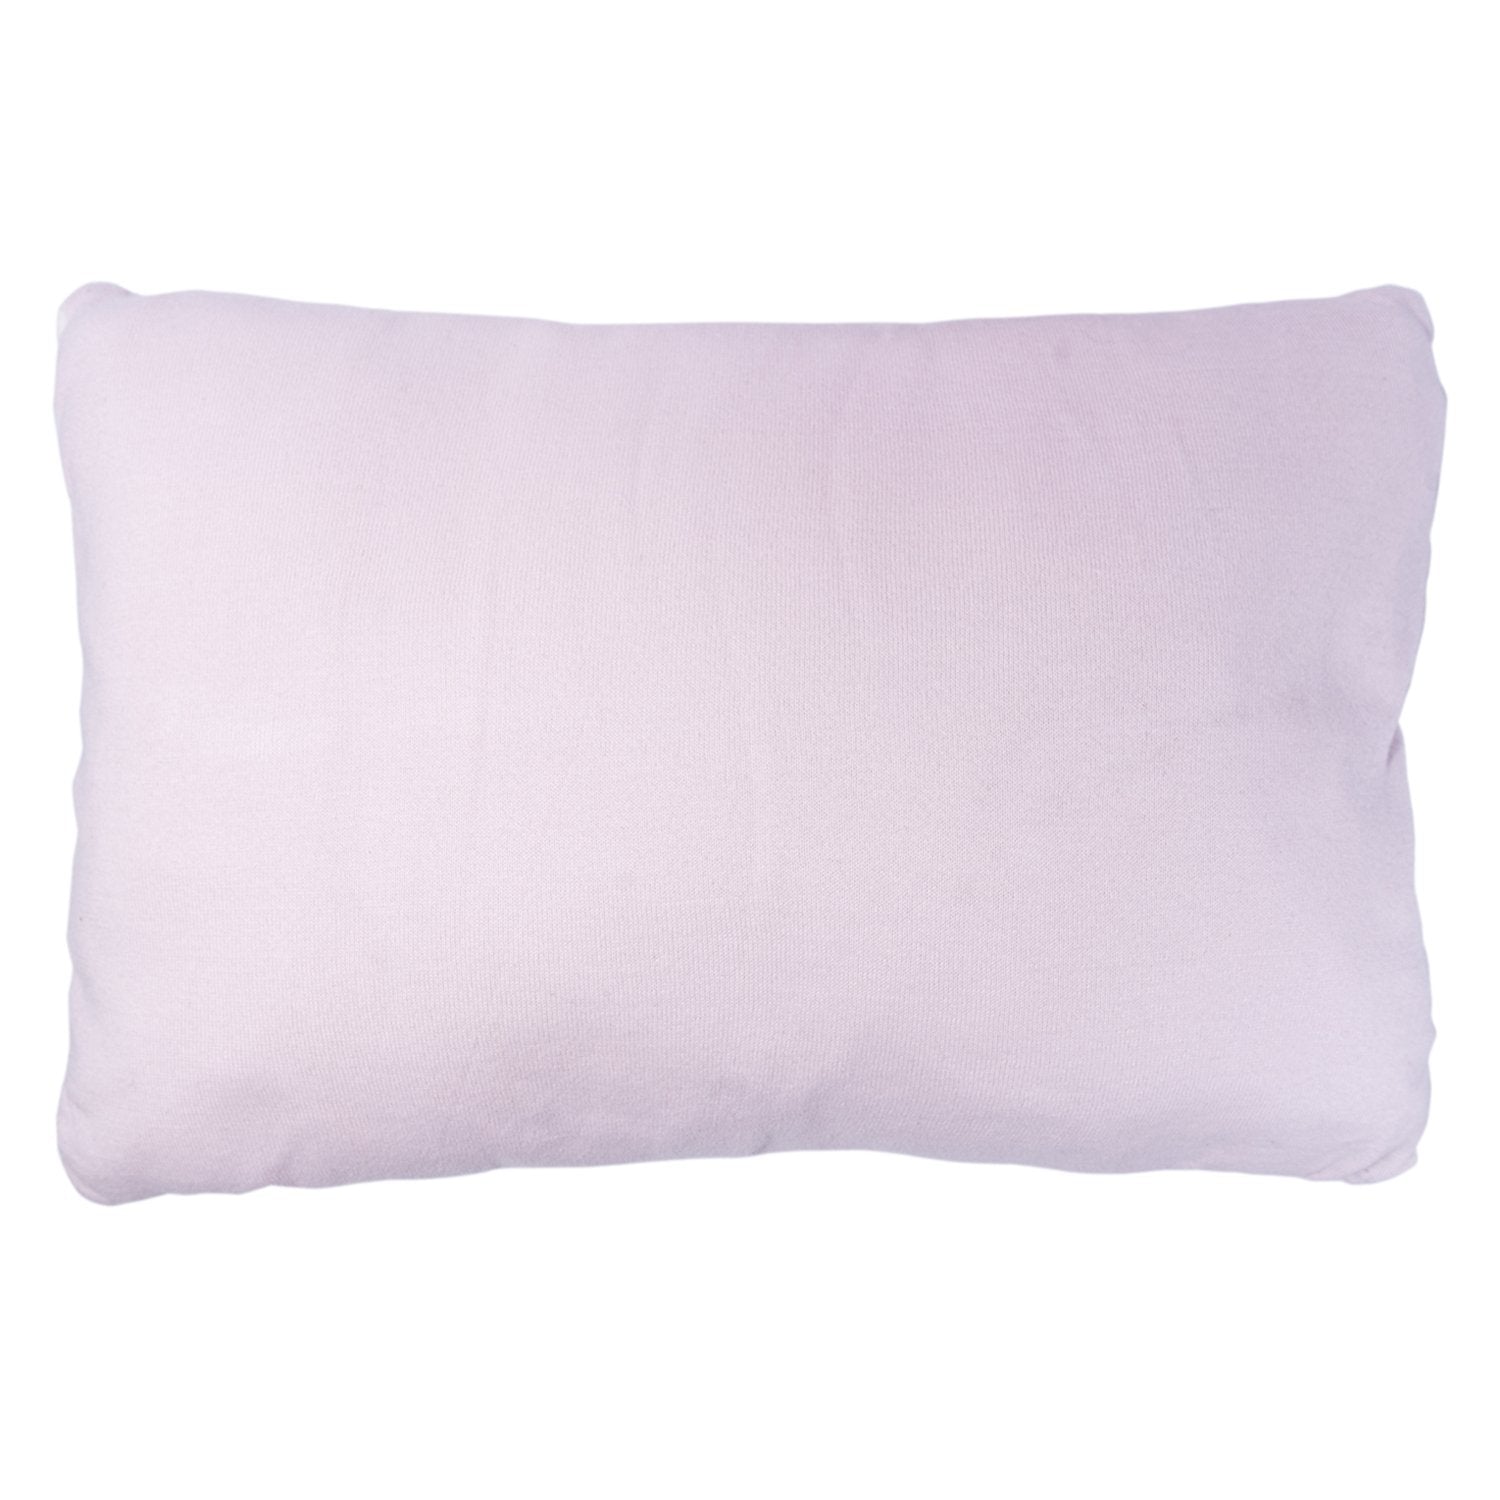 Hot Water Bottle Cushions, Portable Heat Therapy